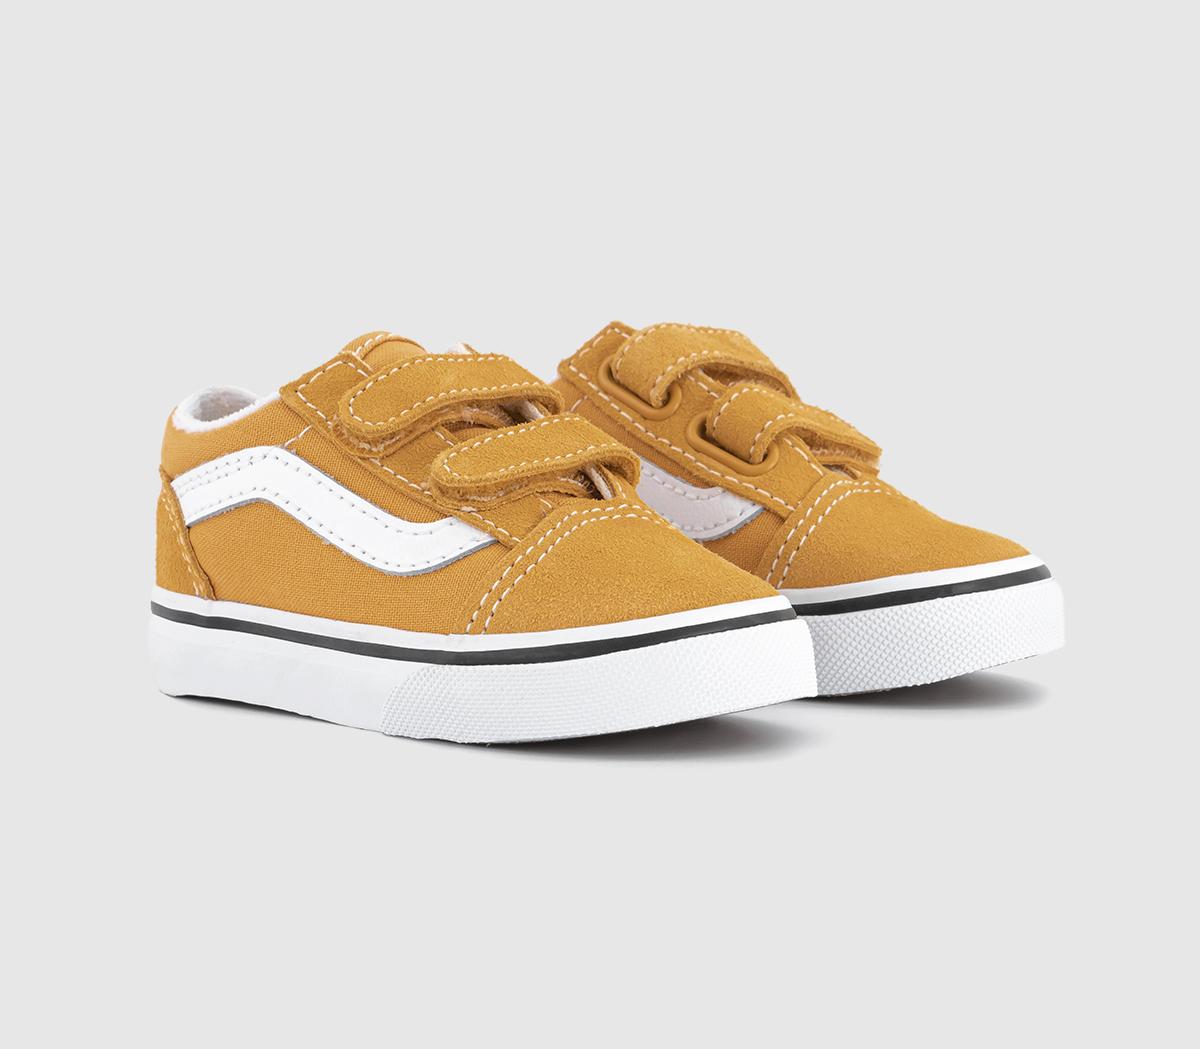 Vans Kids Old Skool Toddler Trainers Color Theory Golden Glow Gold/White, 8infant